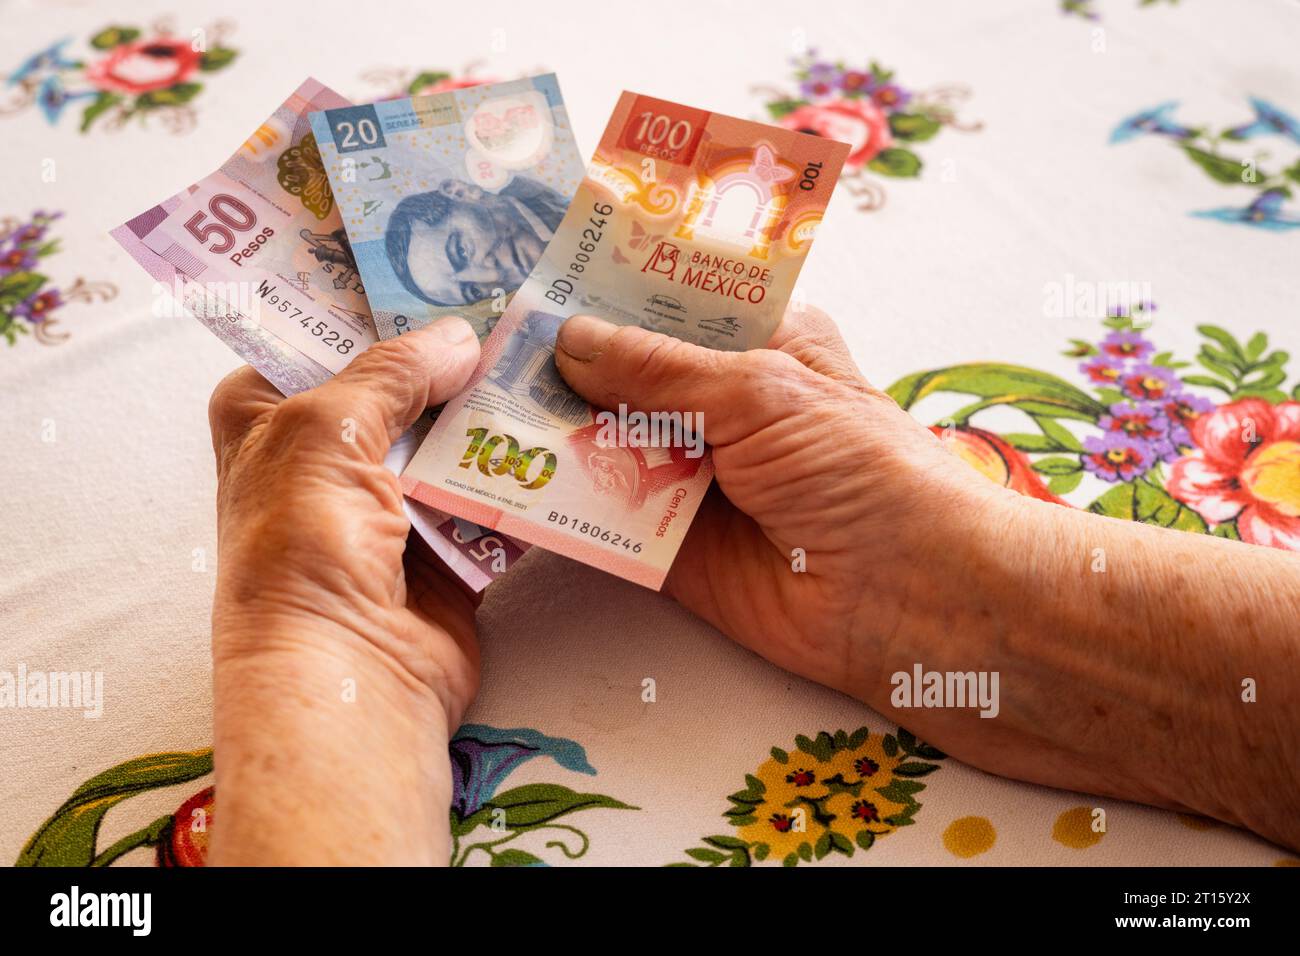 Mexico money, Eldelry woman holds several mexican pesos banknotes in her hand, Financial problems of pensioners, low pensions, high prices Stock Photo